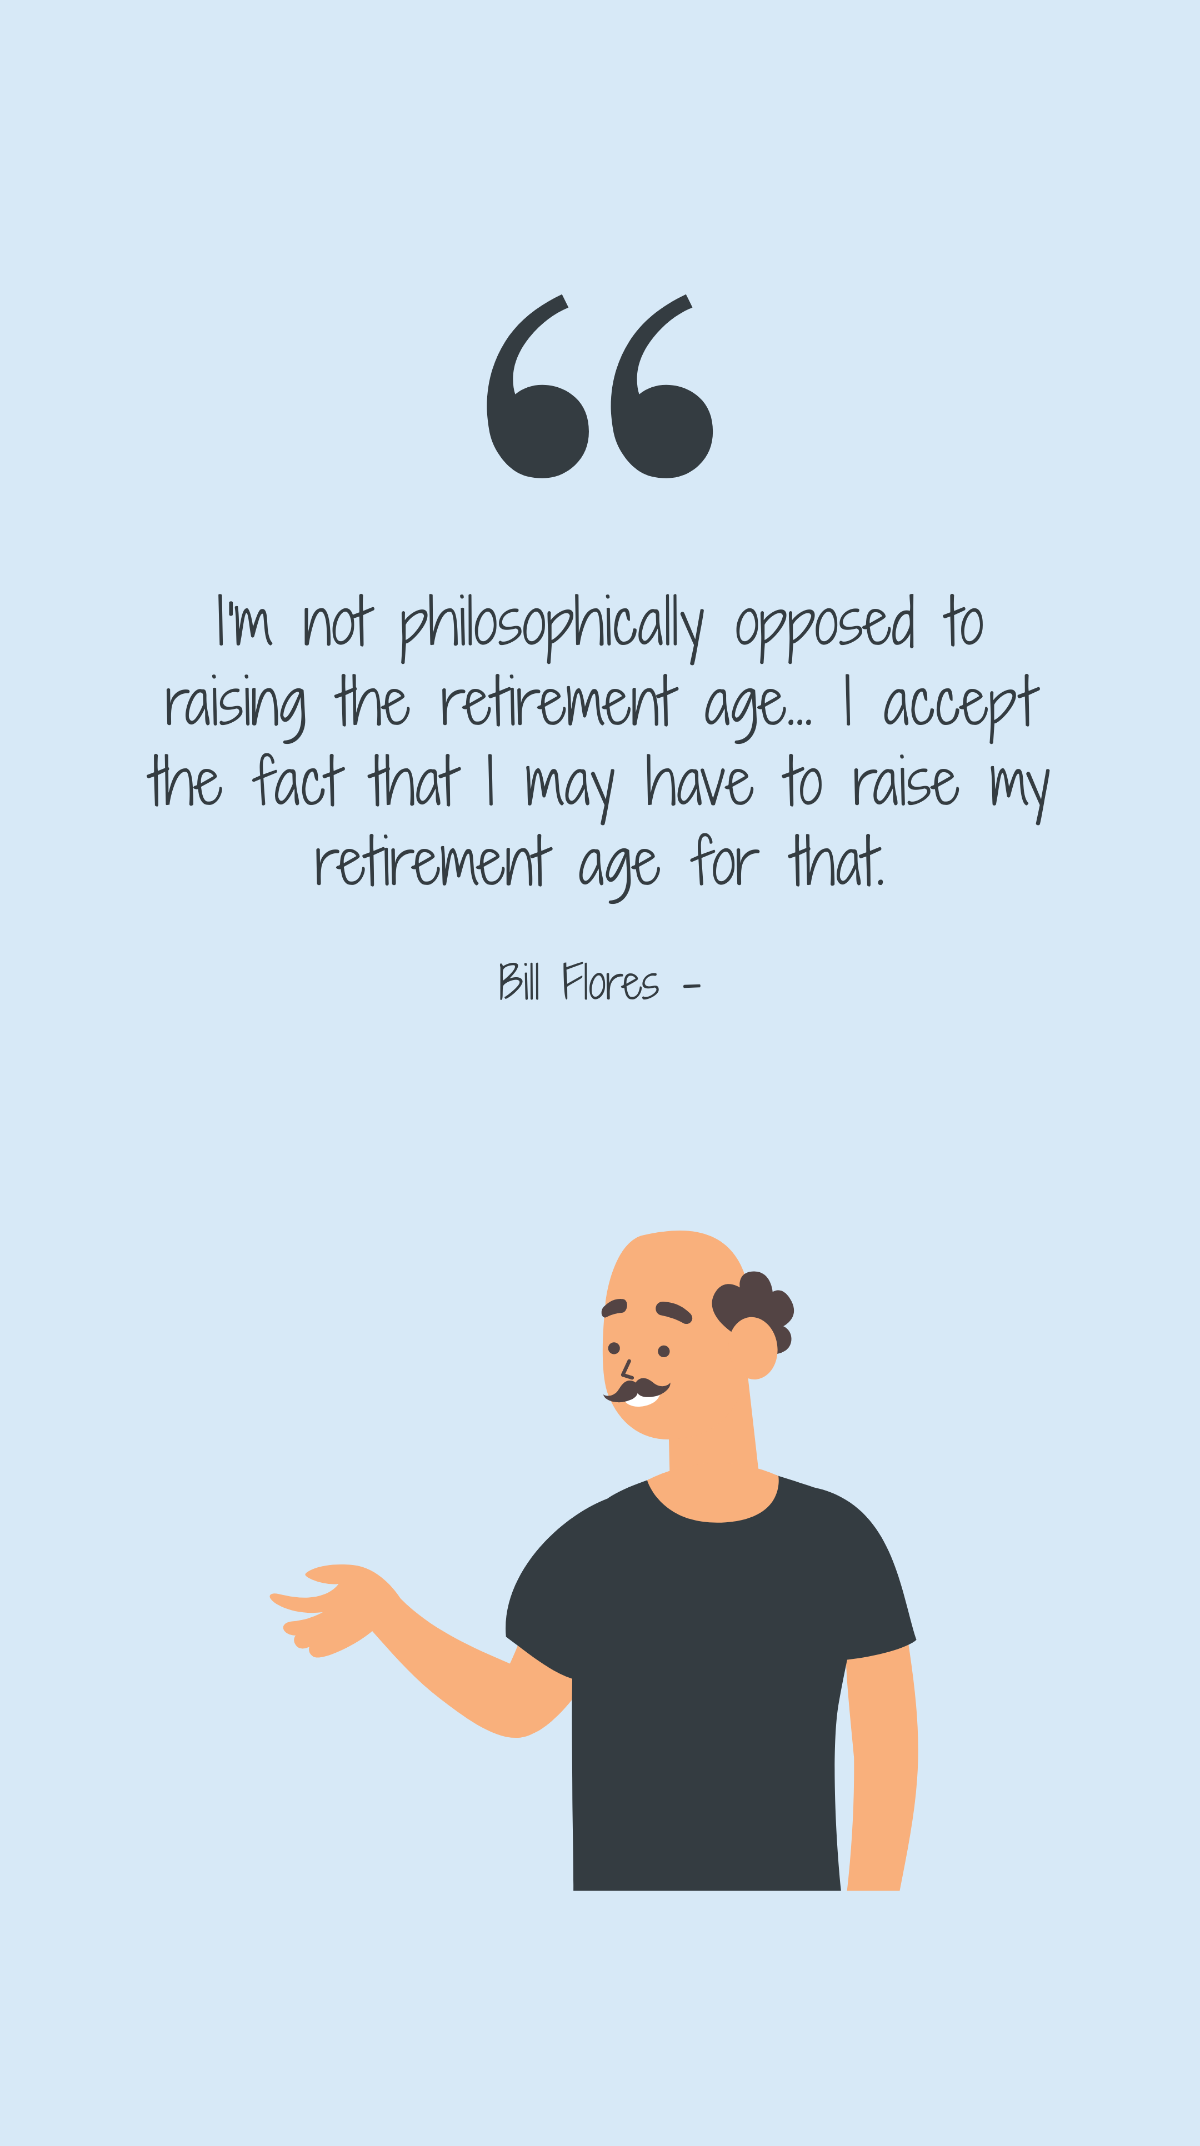 Free Bill Flores - I'm not philosophically opposed to raising the retirement age... I accept the fact that I may have to raise my retirement age for that. Template